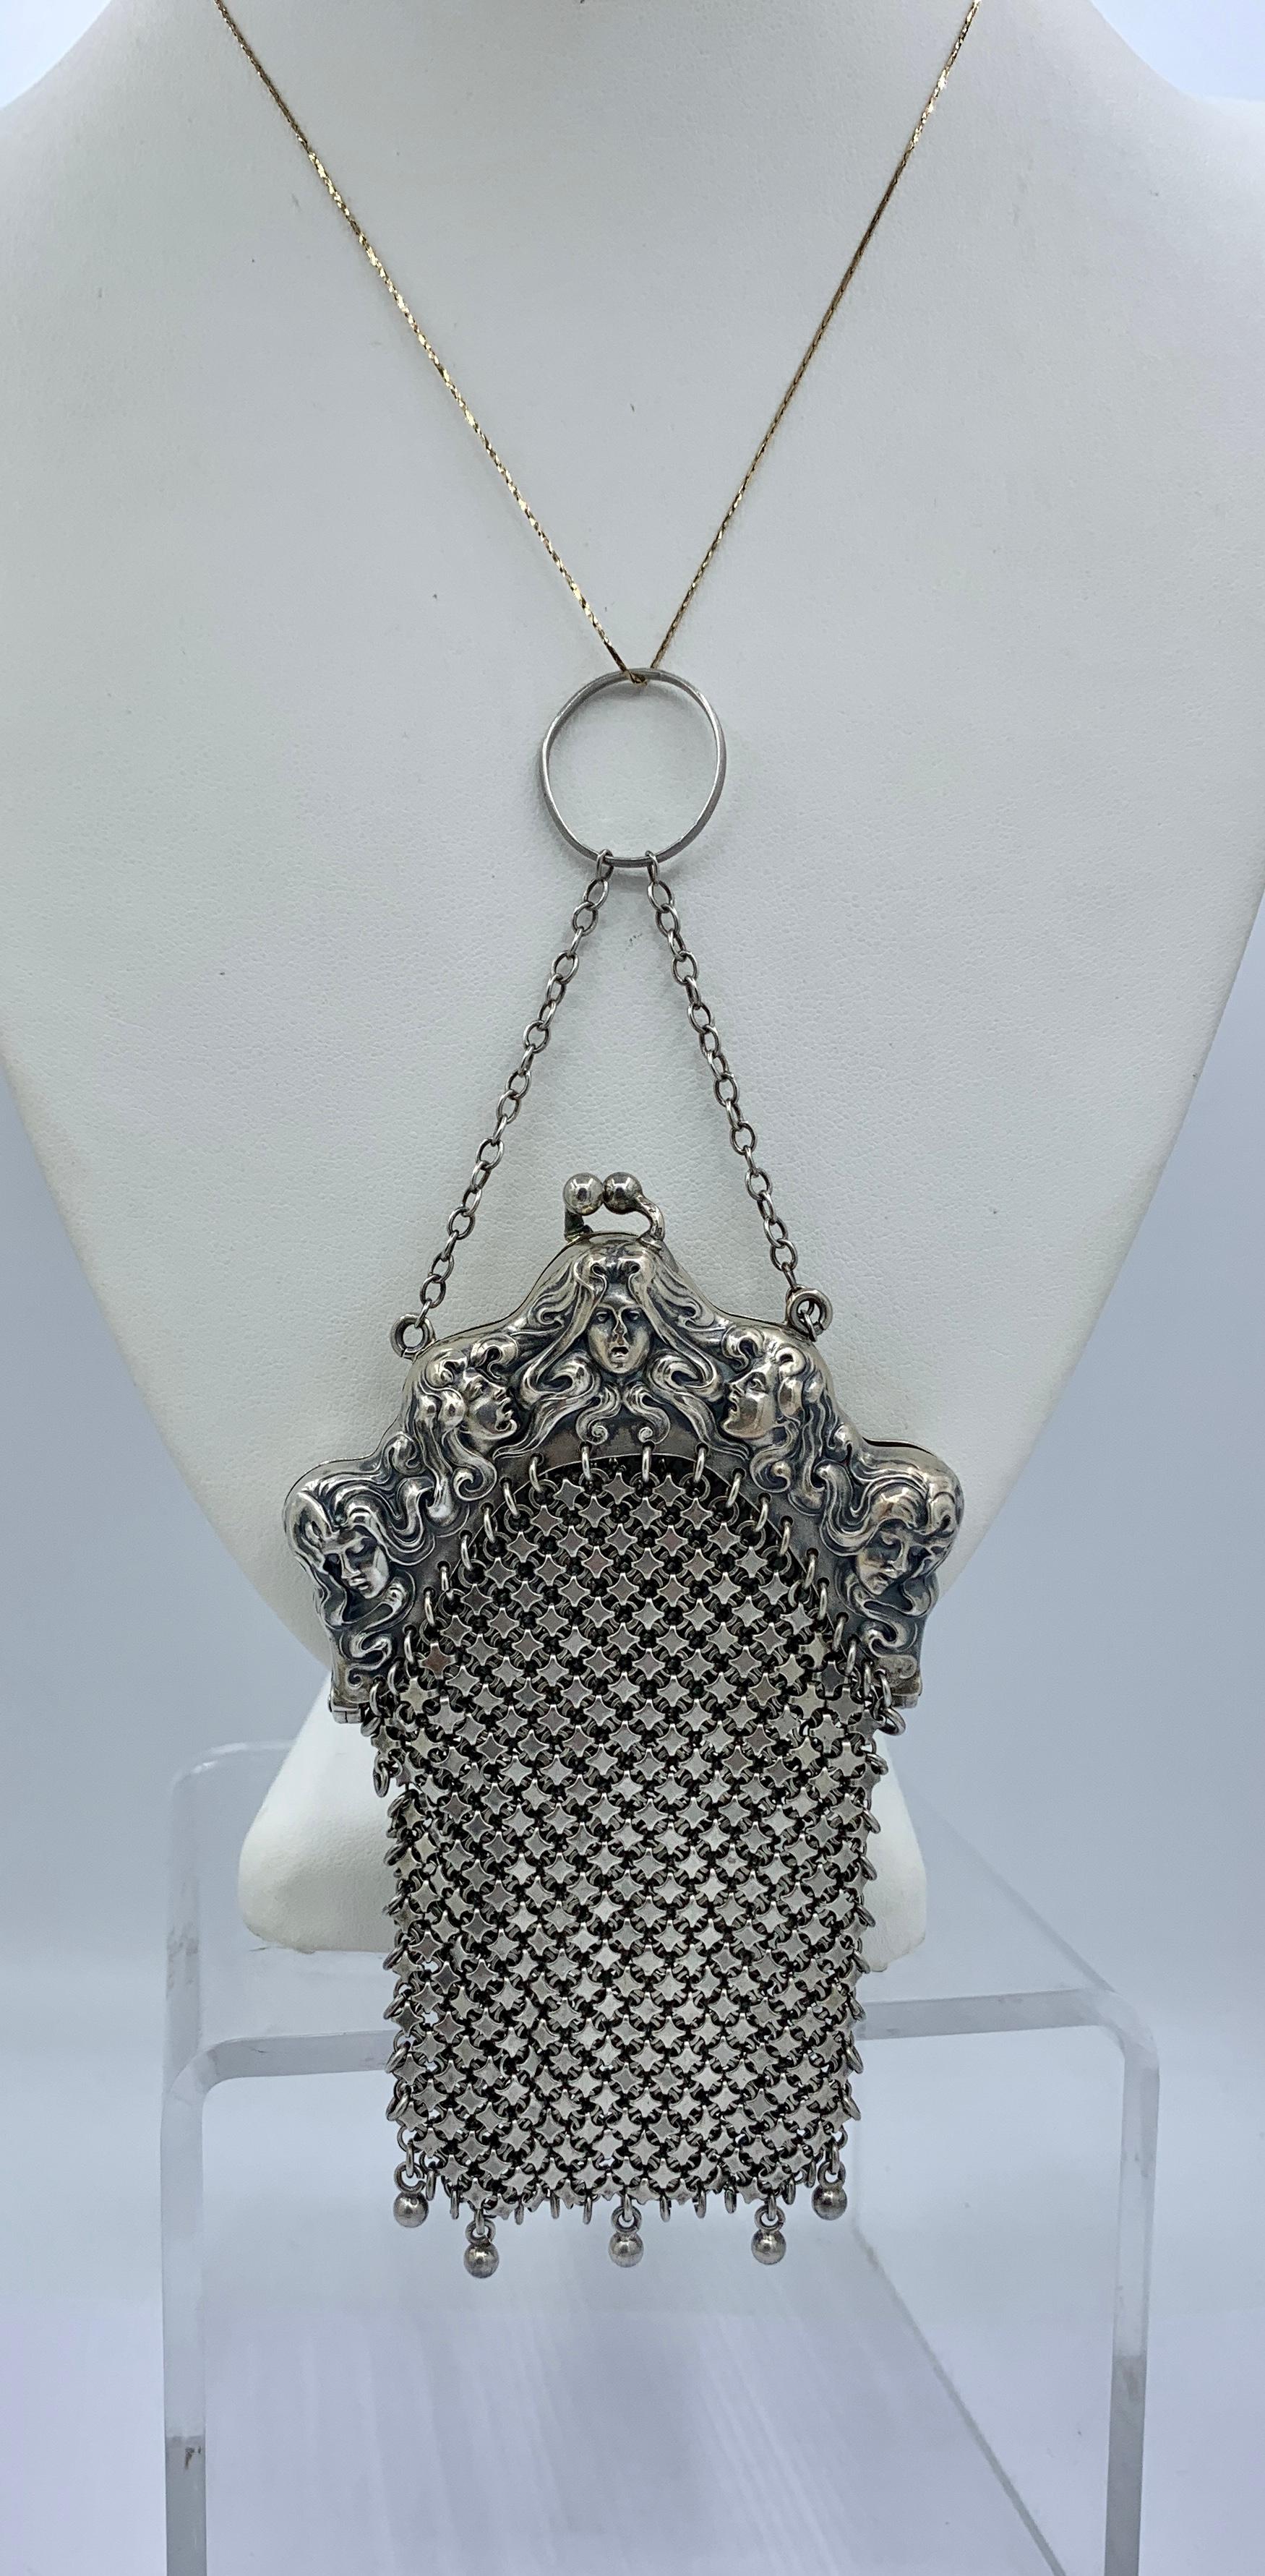 THIS IS AN EXTREMELY RARE STERLING SILVER LADIES HANDBAG OF EXTRAORDINARY BEAUTY WITH THE FACES OF FIVE WOMEN MAIDENS WITH EXTRAORDINARY FLOWING HAIR THAT ENCIRCLES AND ENTWINES THE FIVE MAIDENS BY THE ESTEEMED MAKER UNGER BROTHERS.  THE MESH SILVER